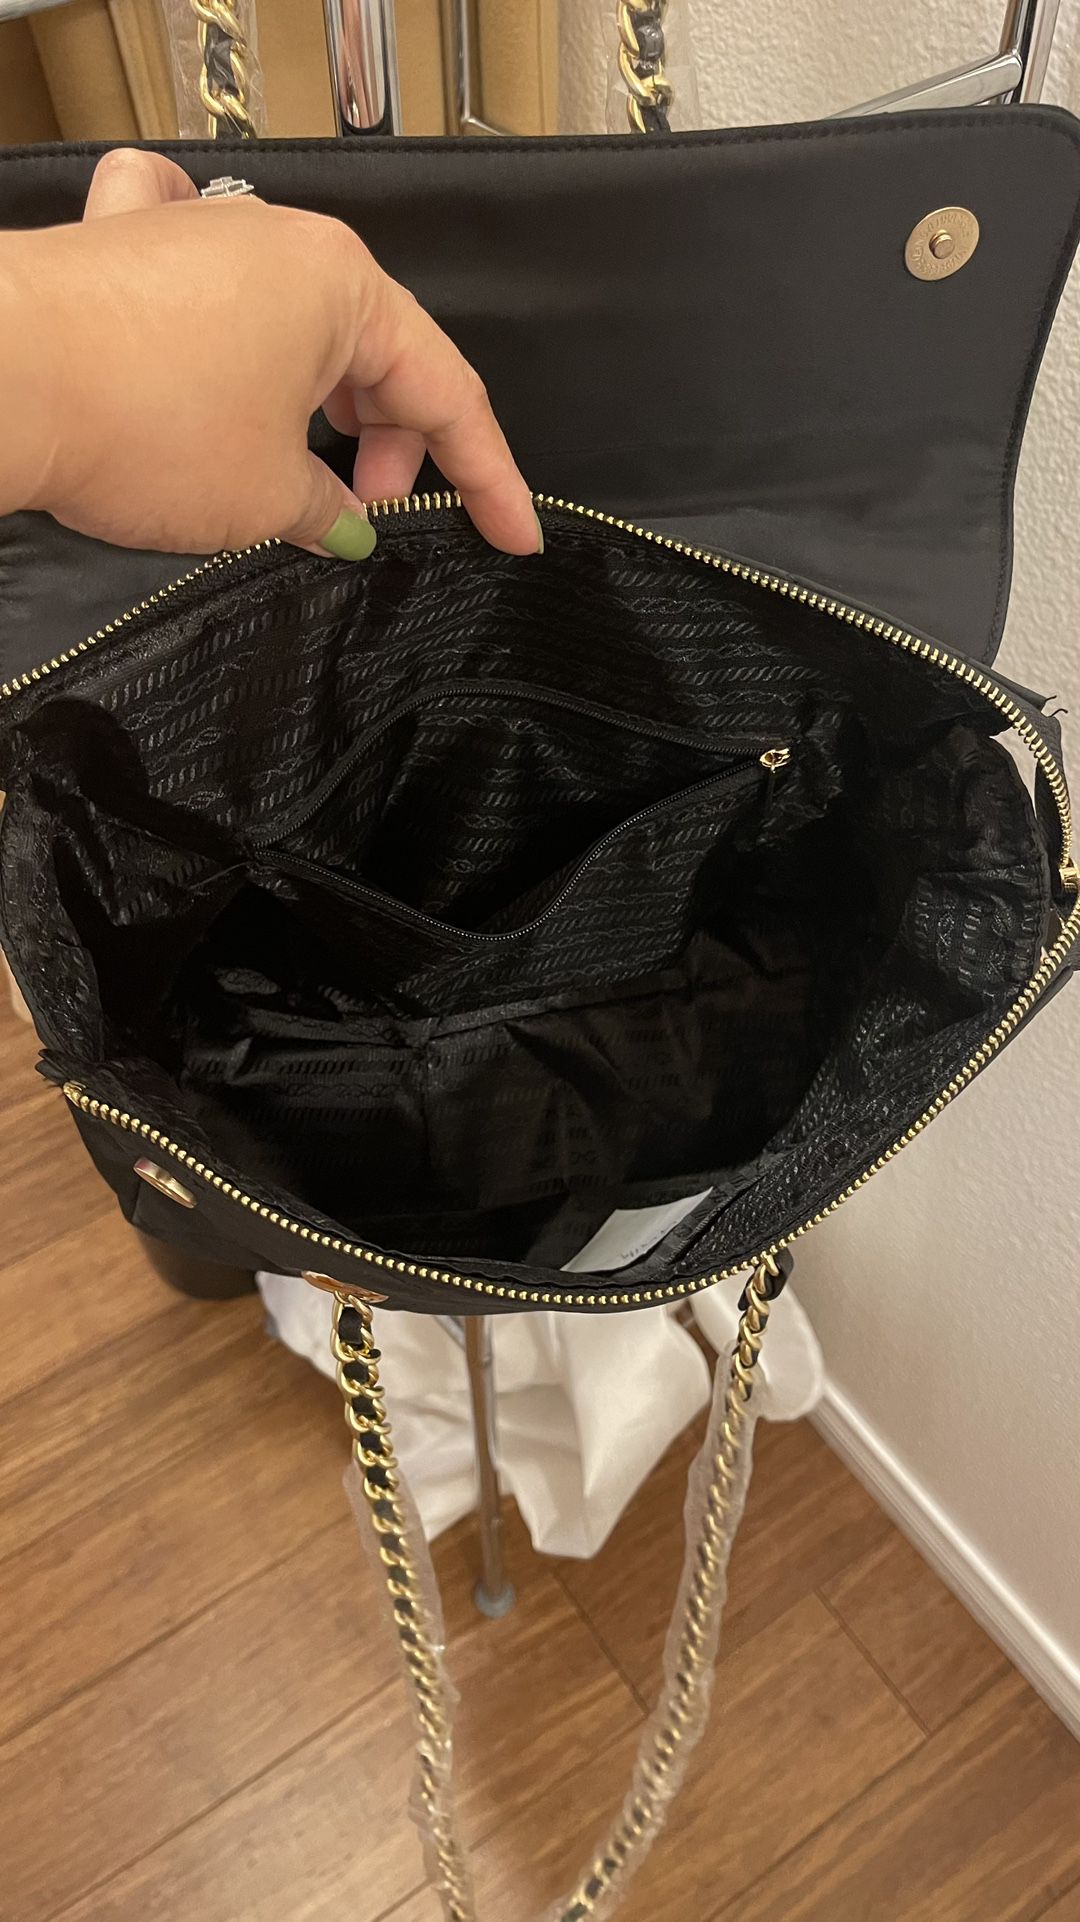 Cat Duffle Bag For $5 for Sale in Chula Vista, CA - OfferUp